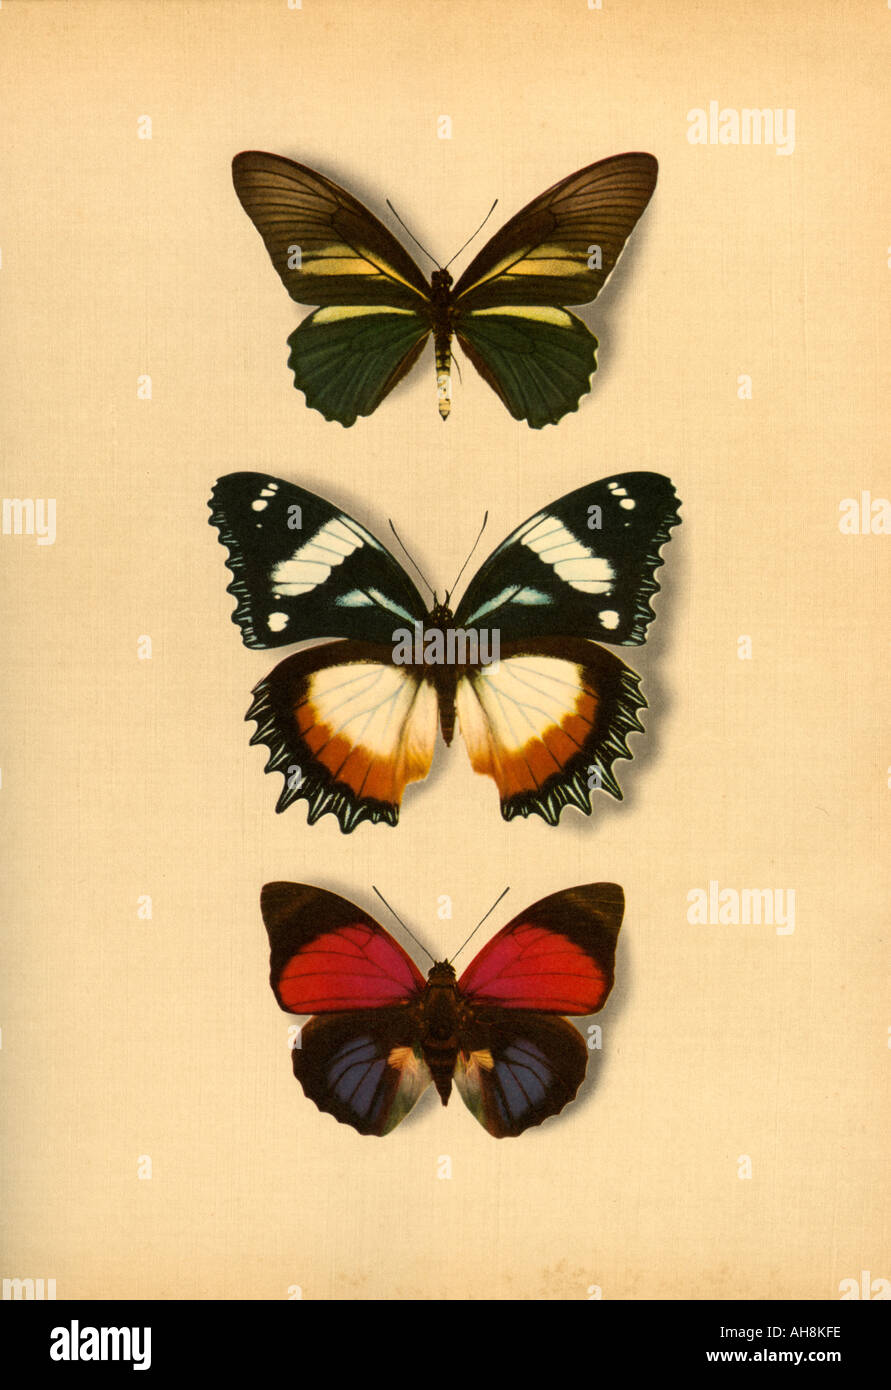 AAD71482 Three artistic colorful Papilion mounted butterflies moths Stock Photo